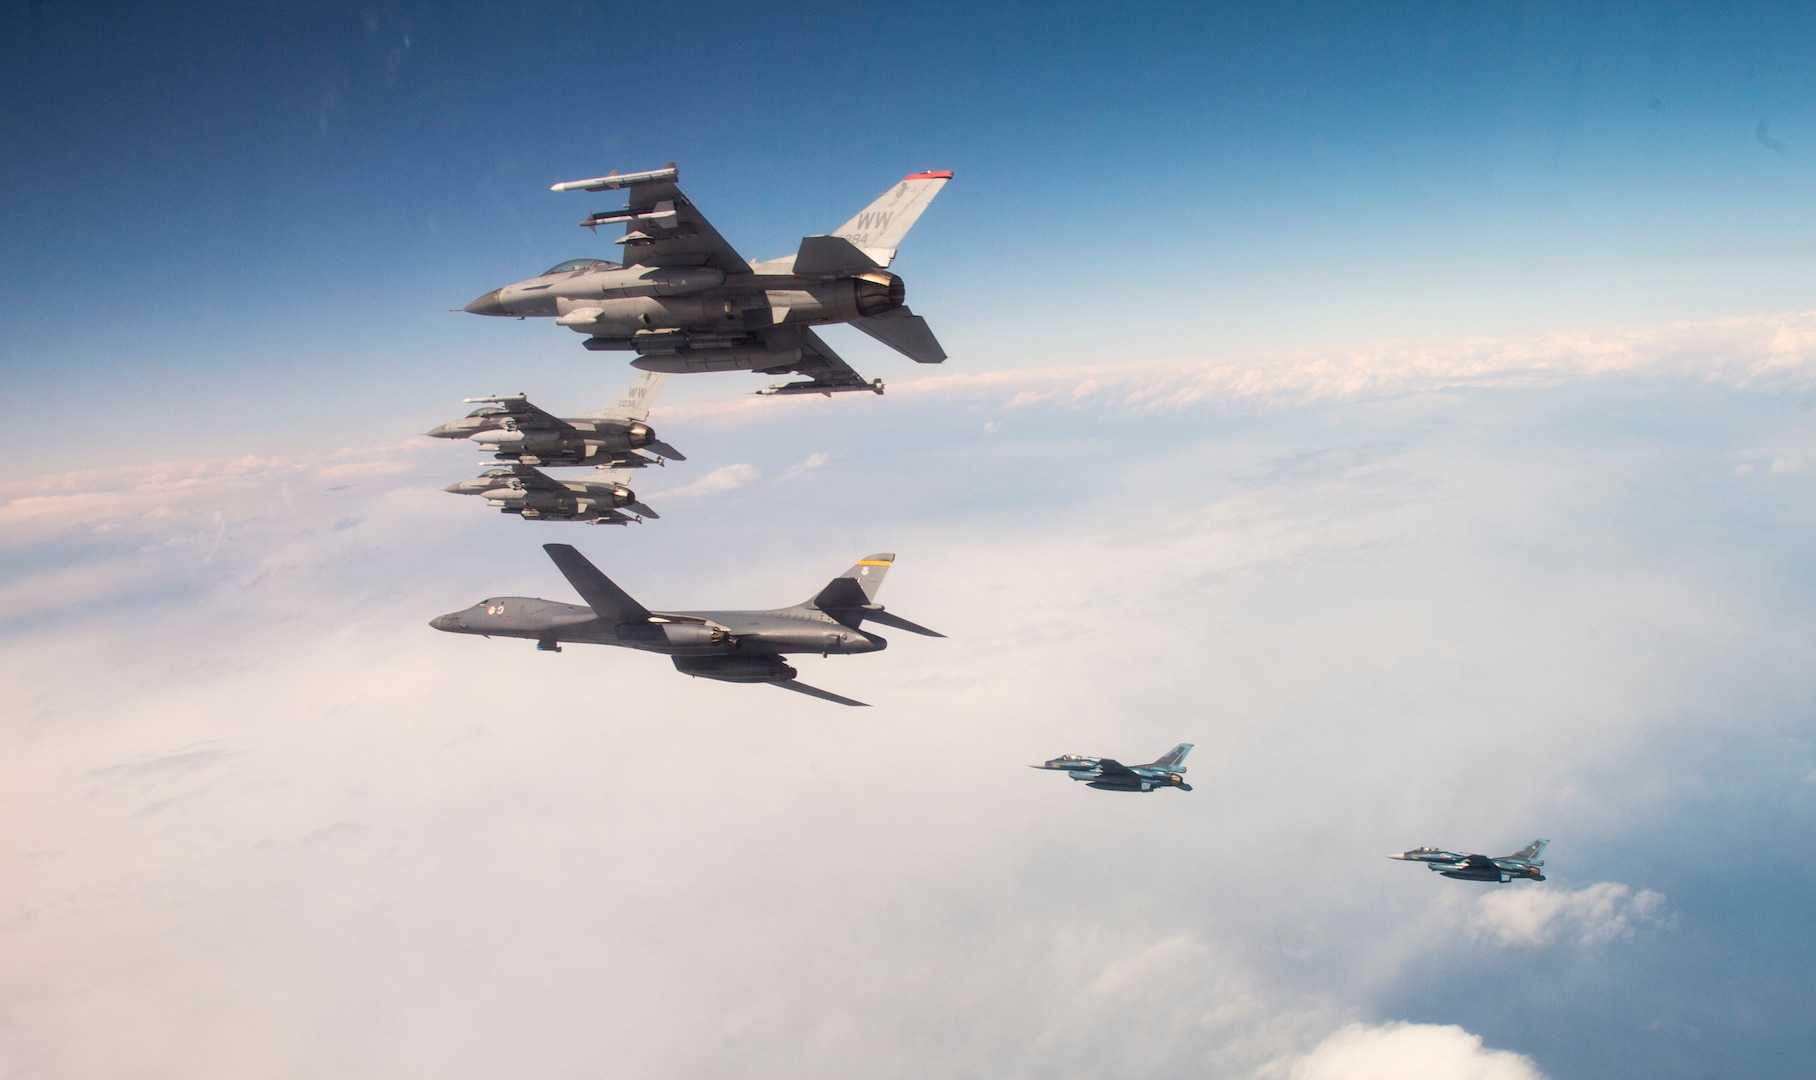 A U.S. Air Force B-1B Lancer from Ellsworth Air Force Base, S.D. and F-16 Fighting Falcons from Misawa Air Base, Japan, conducted bilateral joint training with Japan Air Self-Defense Force (JASDF) F-2s off the coast of Northern Japan, April 22, 2020. U.S. Strategic Command's bomber forces regularly conduct combined theater security cooperation engagements with allies and partners, demonstrating U.S. capability to command, control and conduct bomber missions around the world. (U.S. Air Force photo by Tech. Sgt. Timothy Moore)